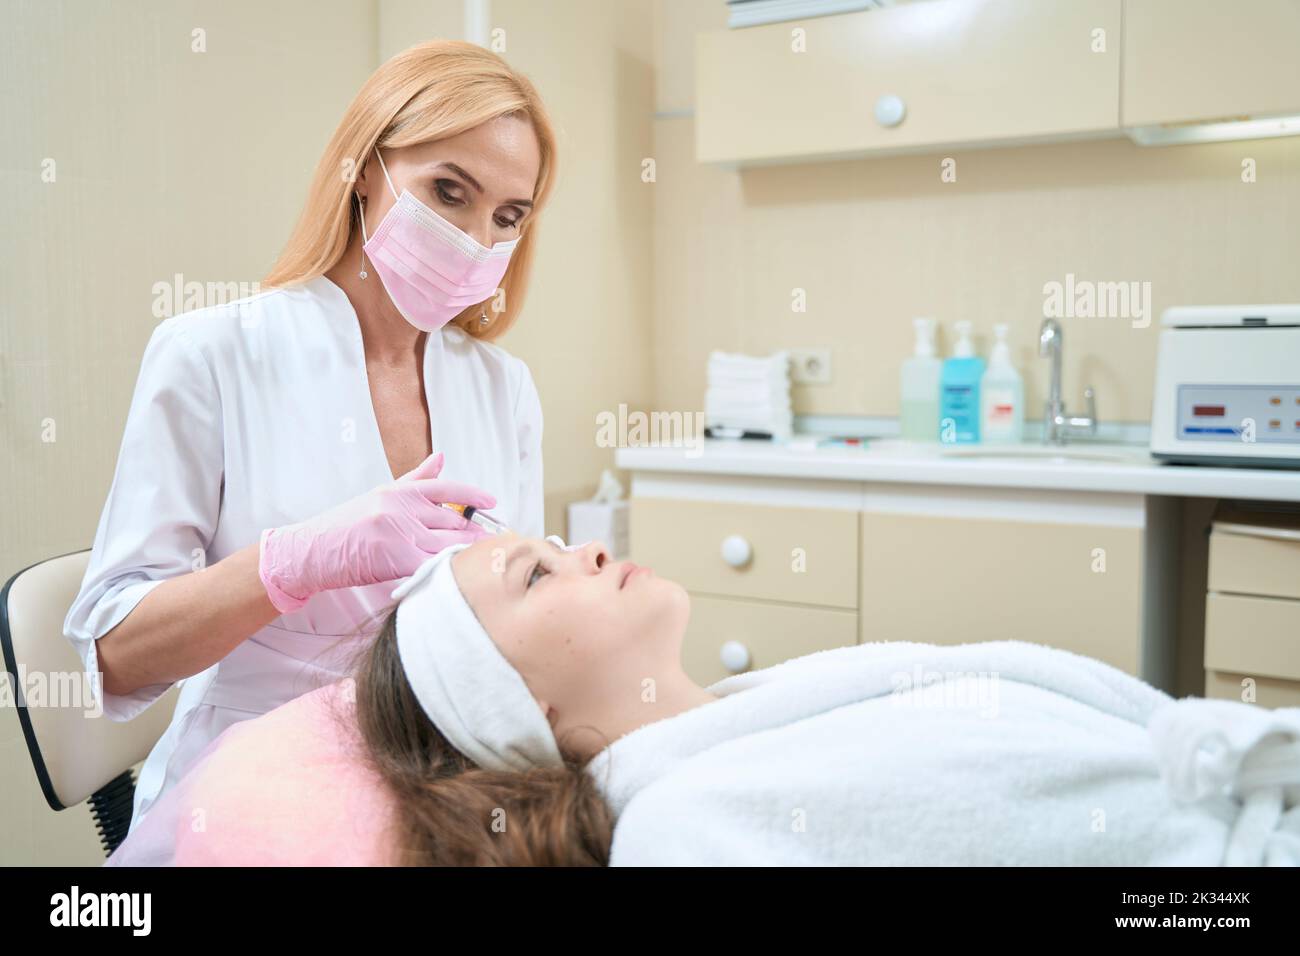 Doctor cosmetologist makes injection in forehead of teenage girl Stock Photo